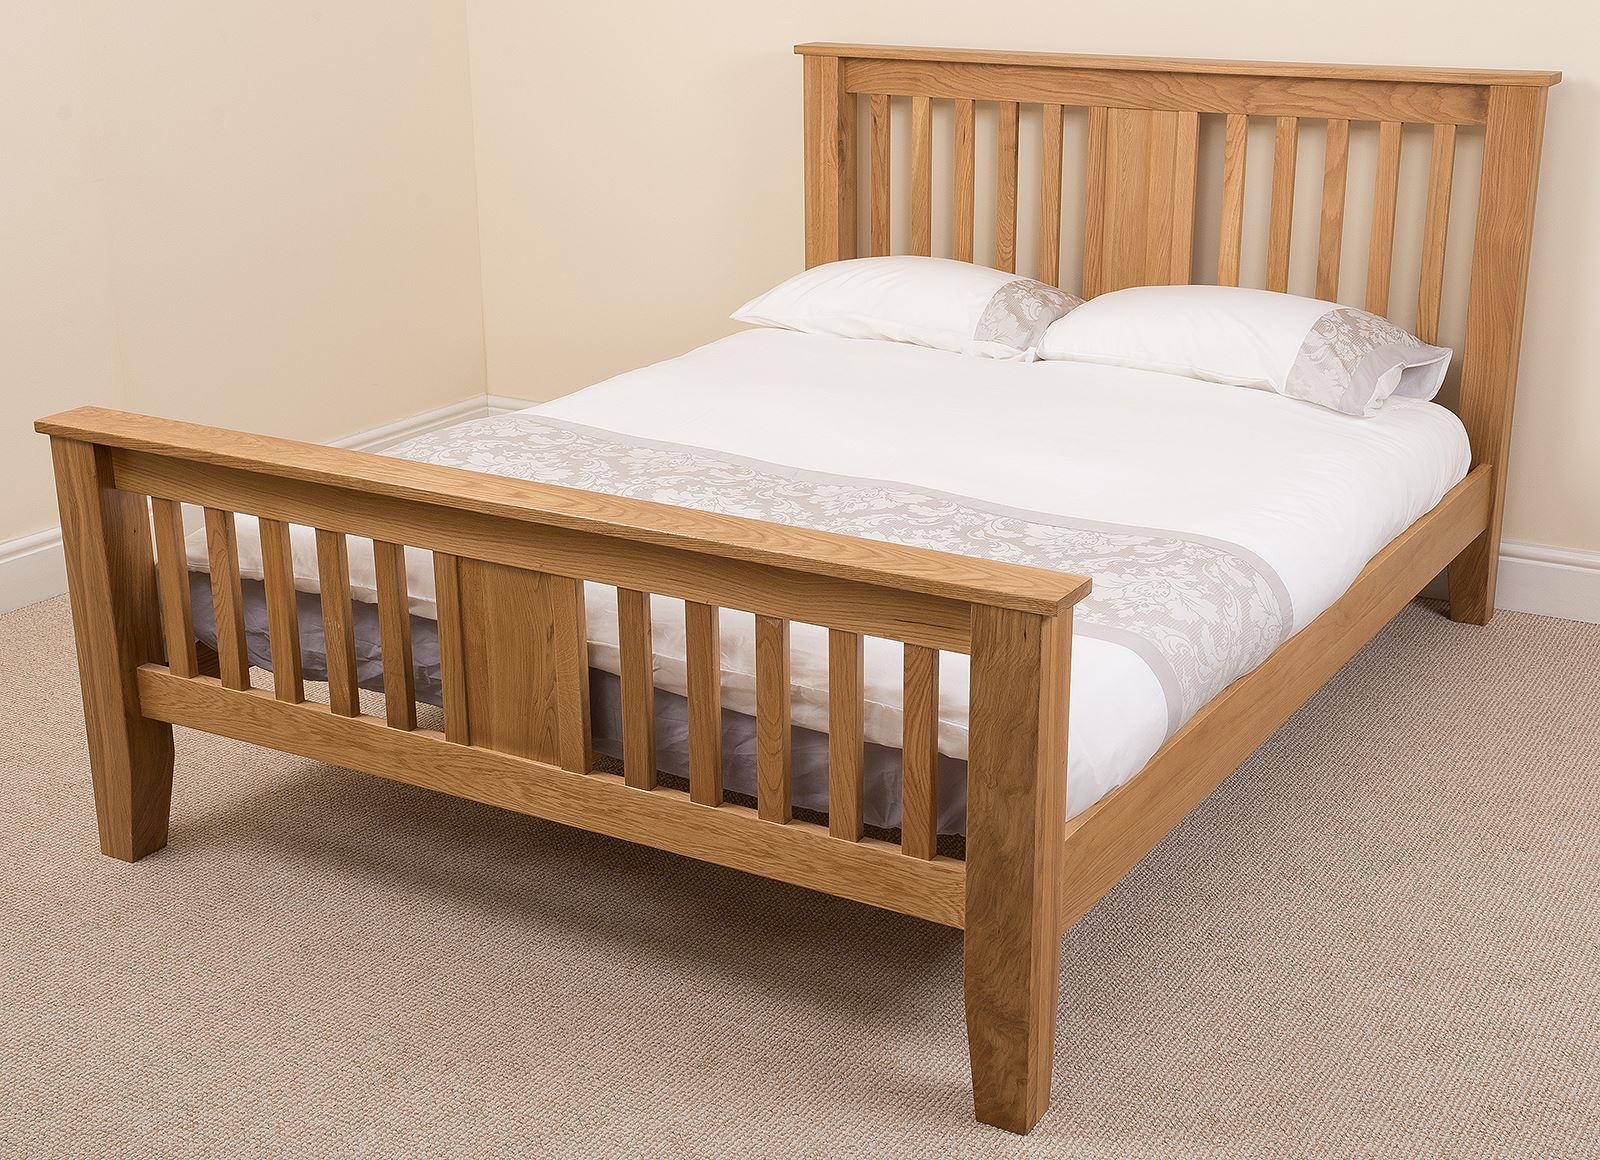 wooden double bed frame and mattress